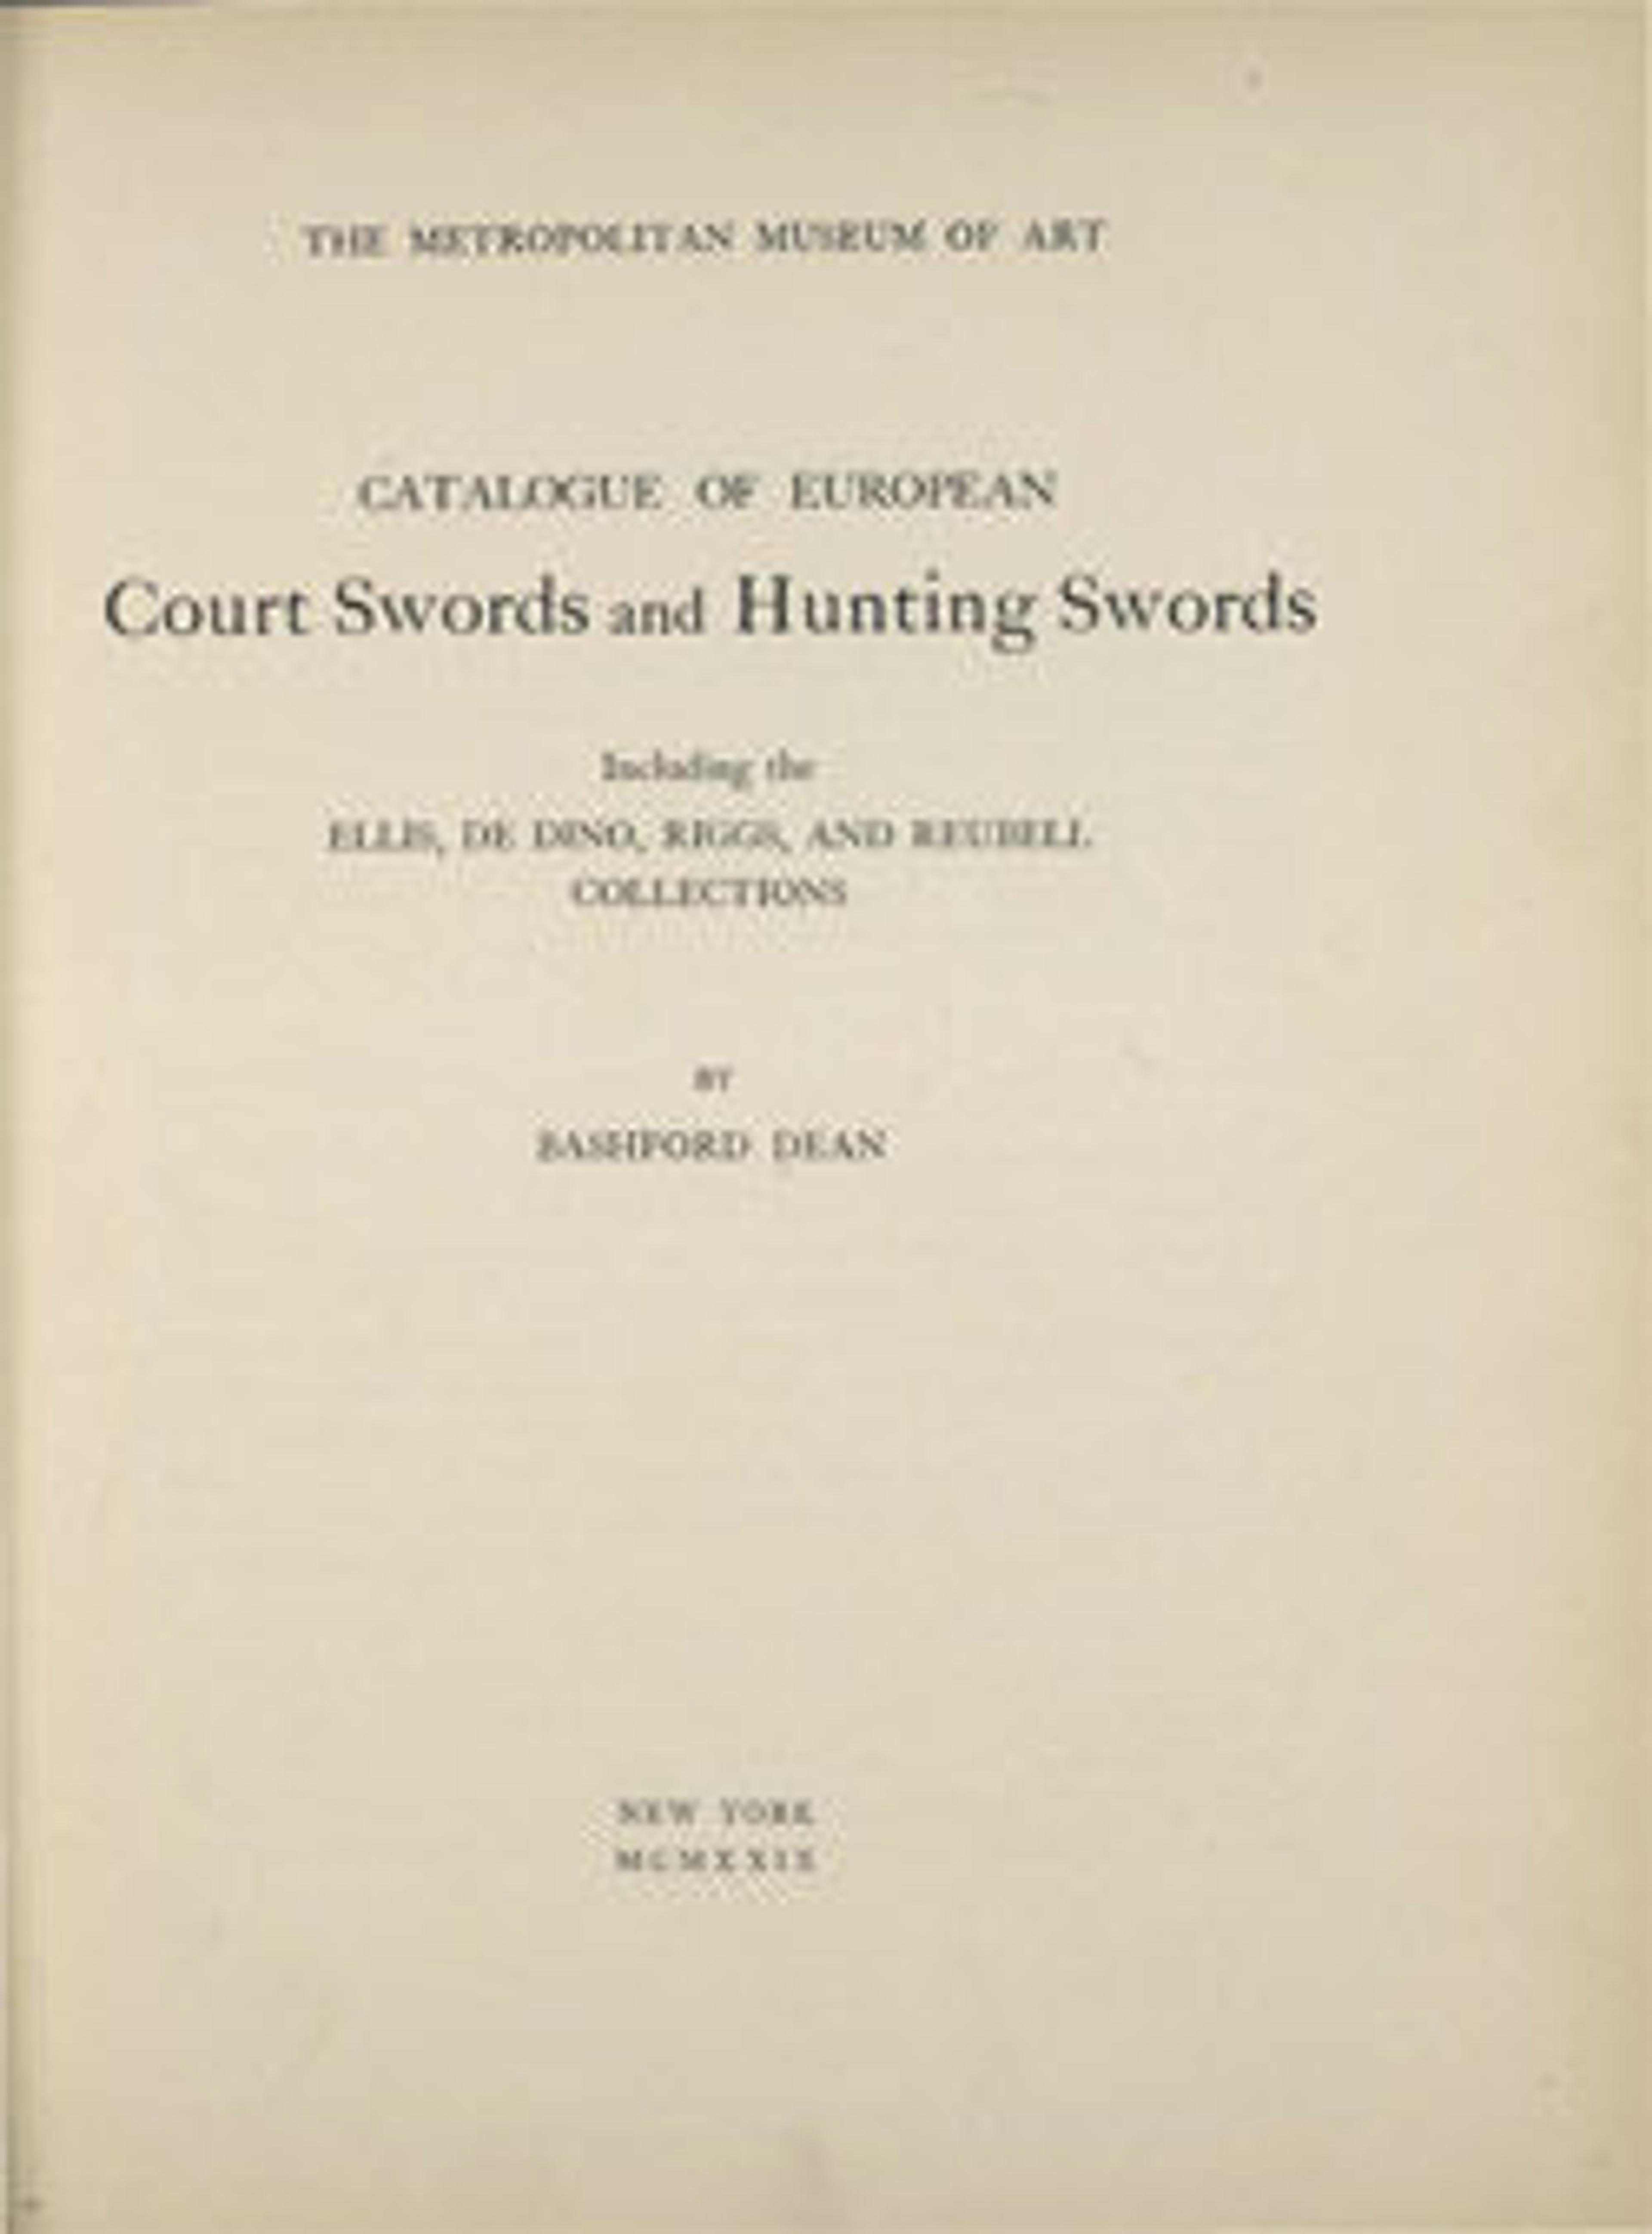 Title page of Catalogue of European Court Swords and Hunting Swords